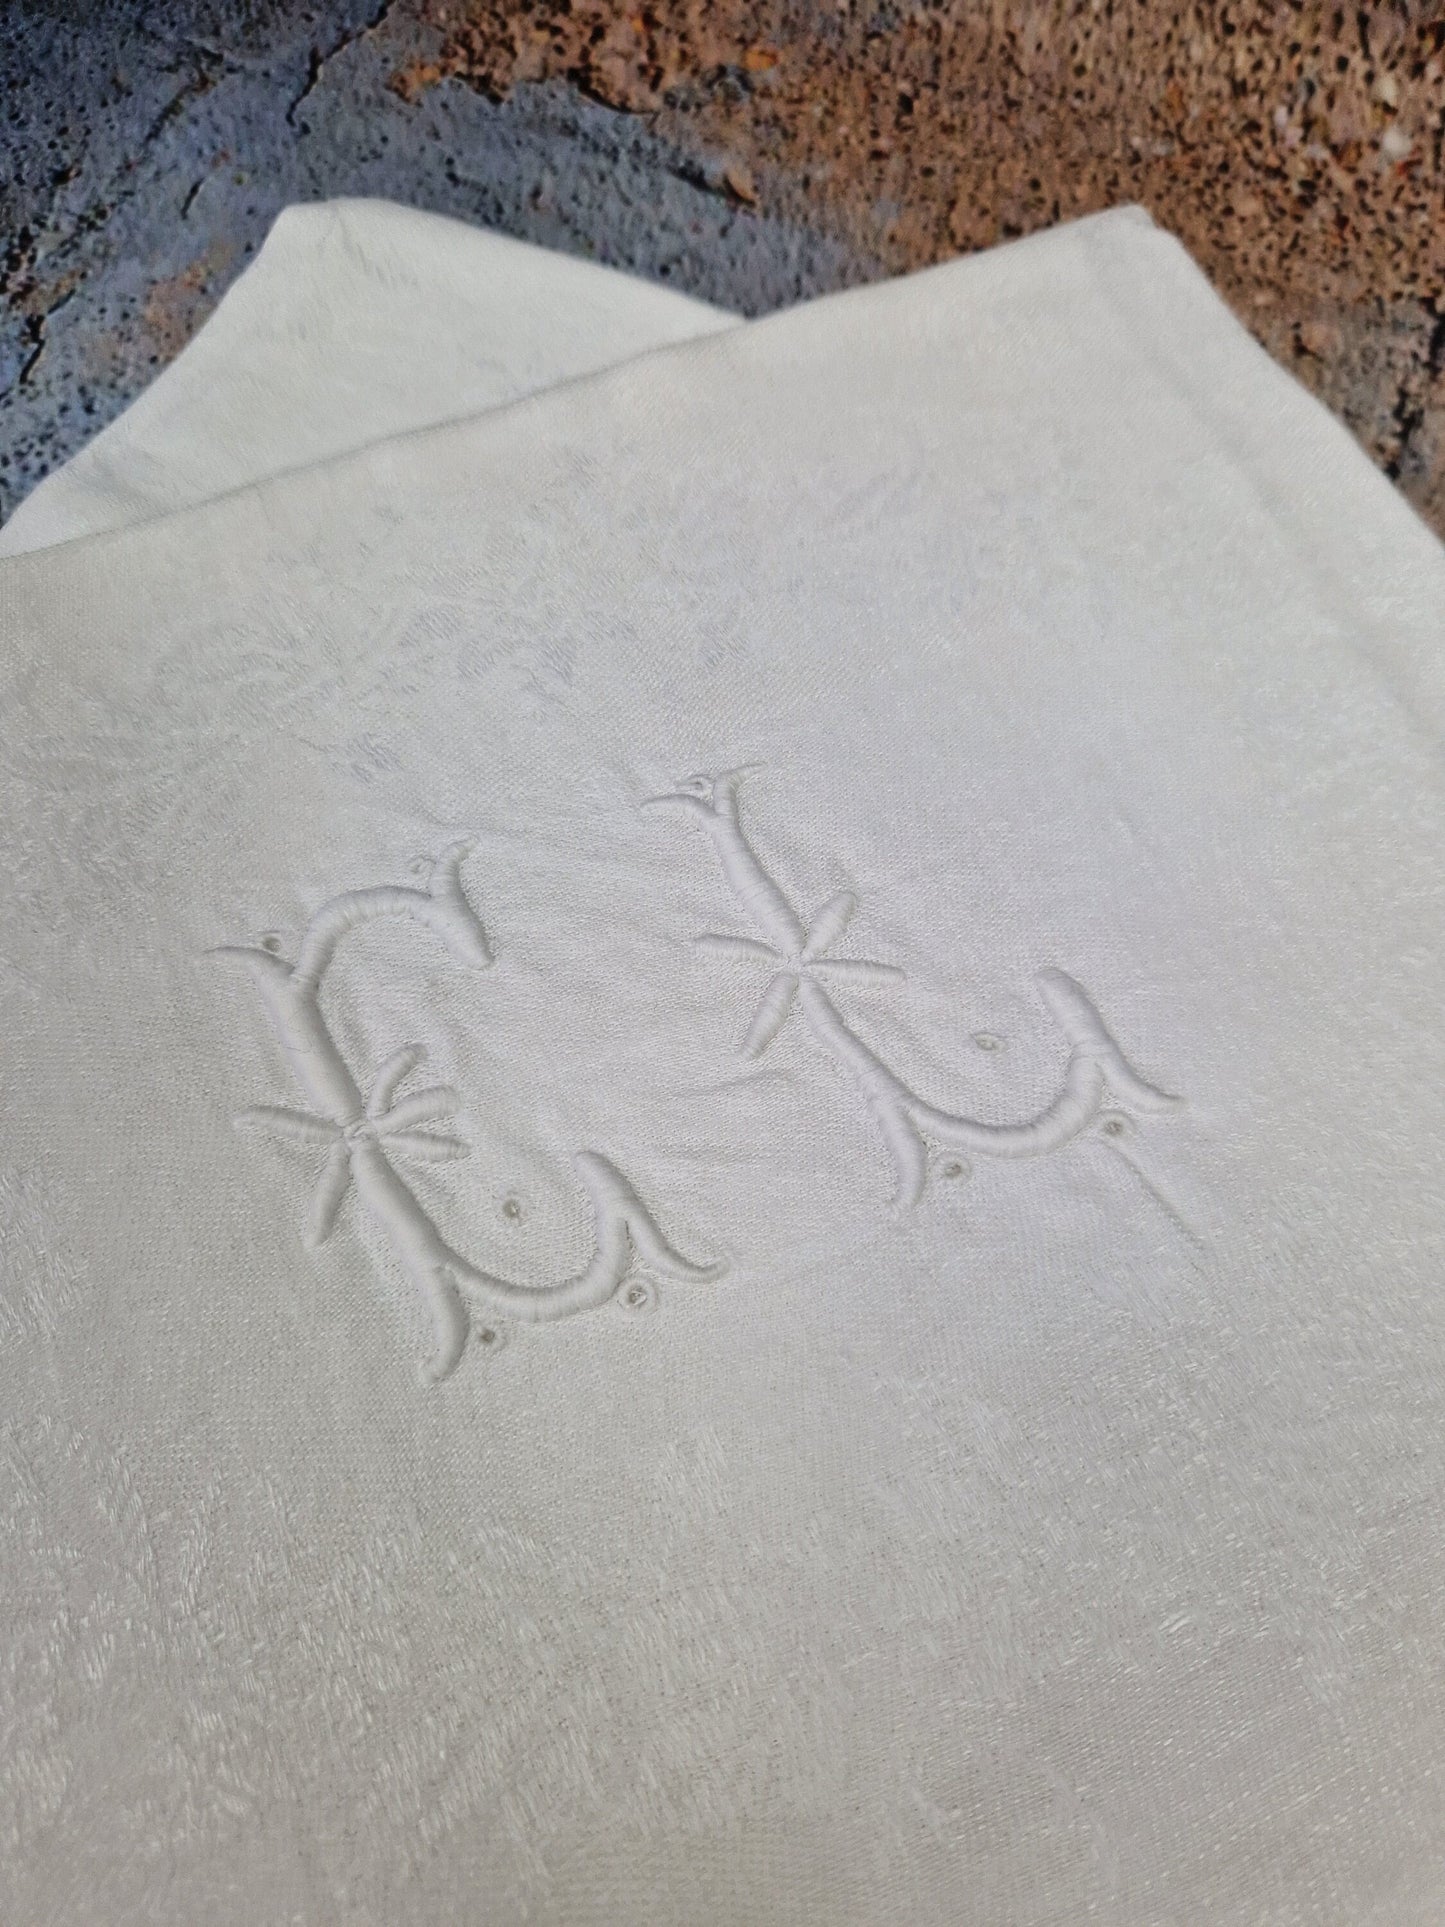 Pair vintage French CL GL monogram embroidered dinner table napkins